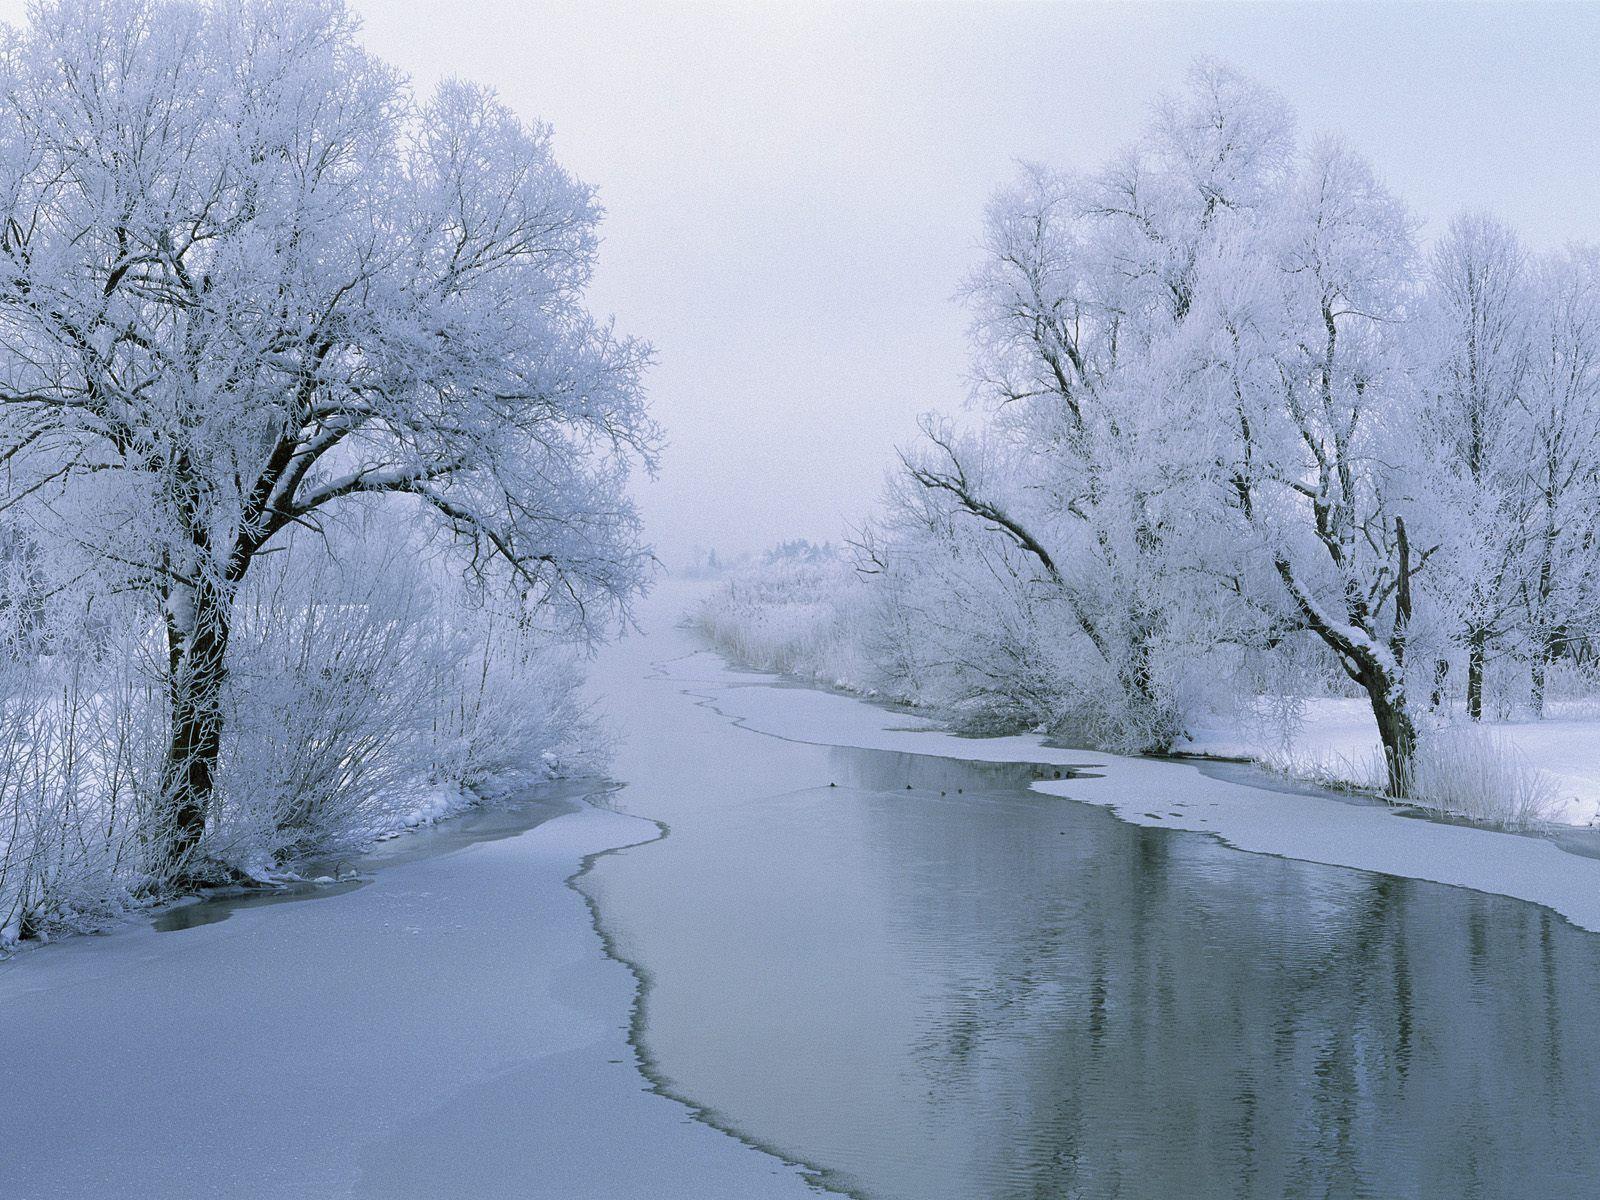 winter scenes scene cool hq background and wallpapaers - Image